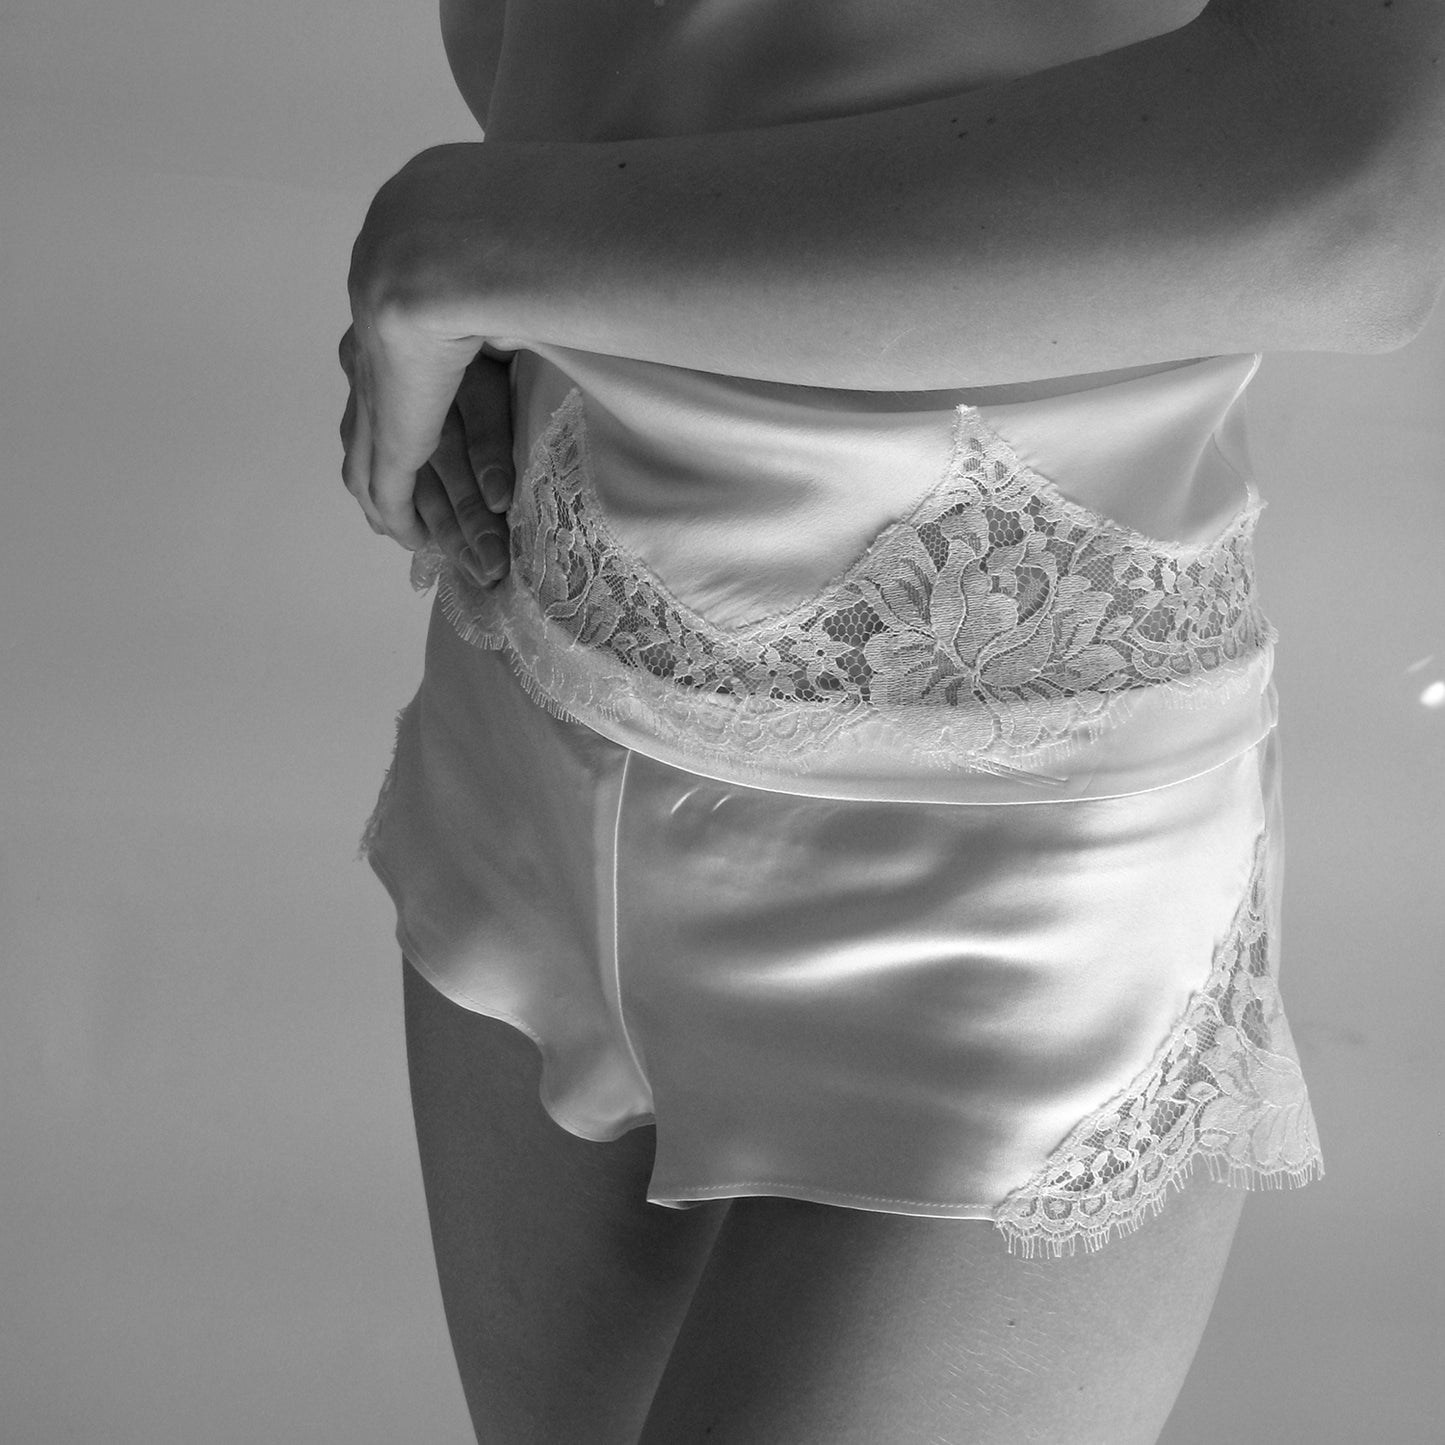 Ivory silk French knickers with French lace